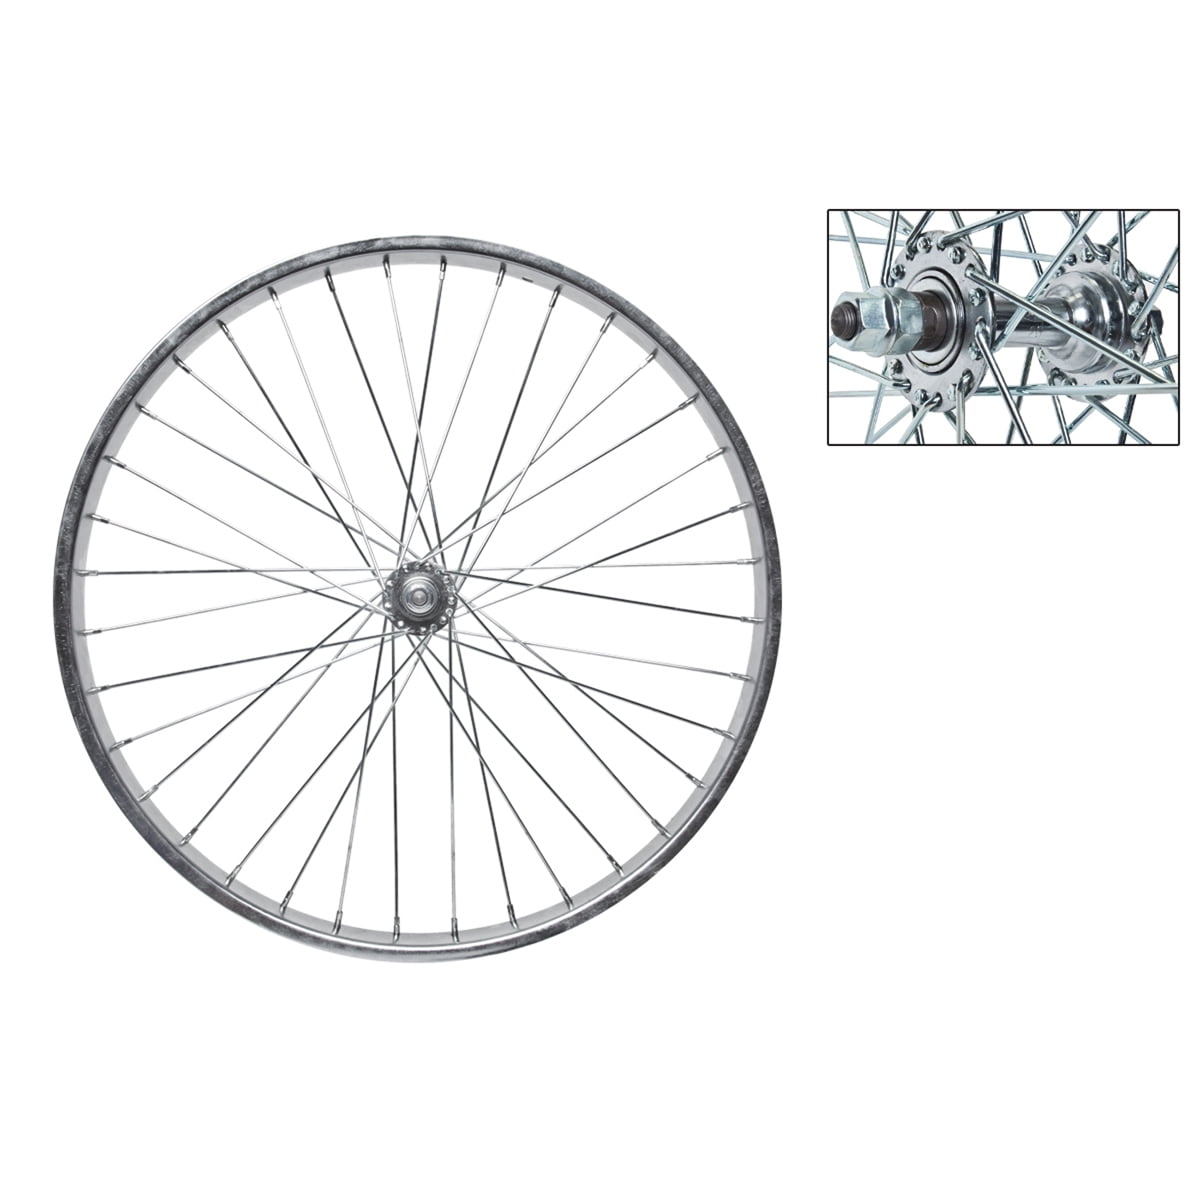 WHEEL MASTER   20" x 1.75" SILVER ALLOY BICYCLE FRONT WHEEL 